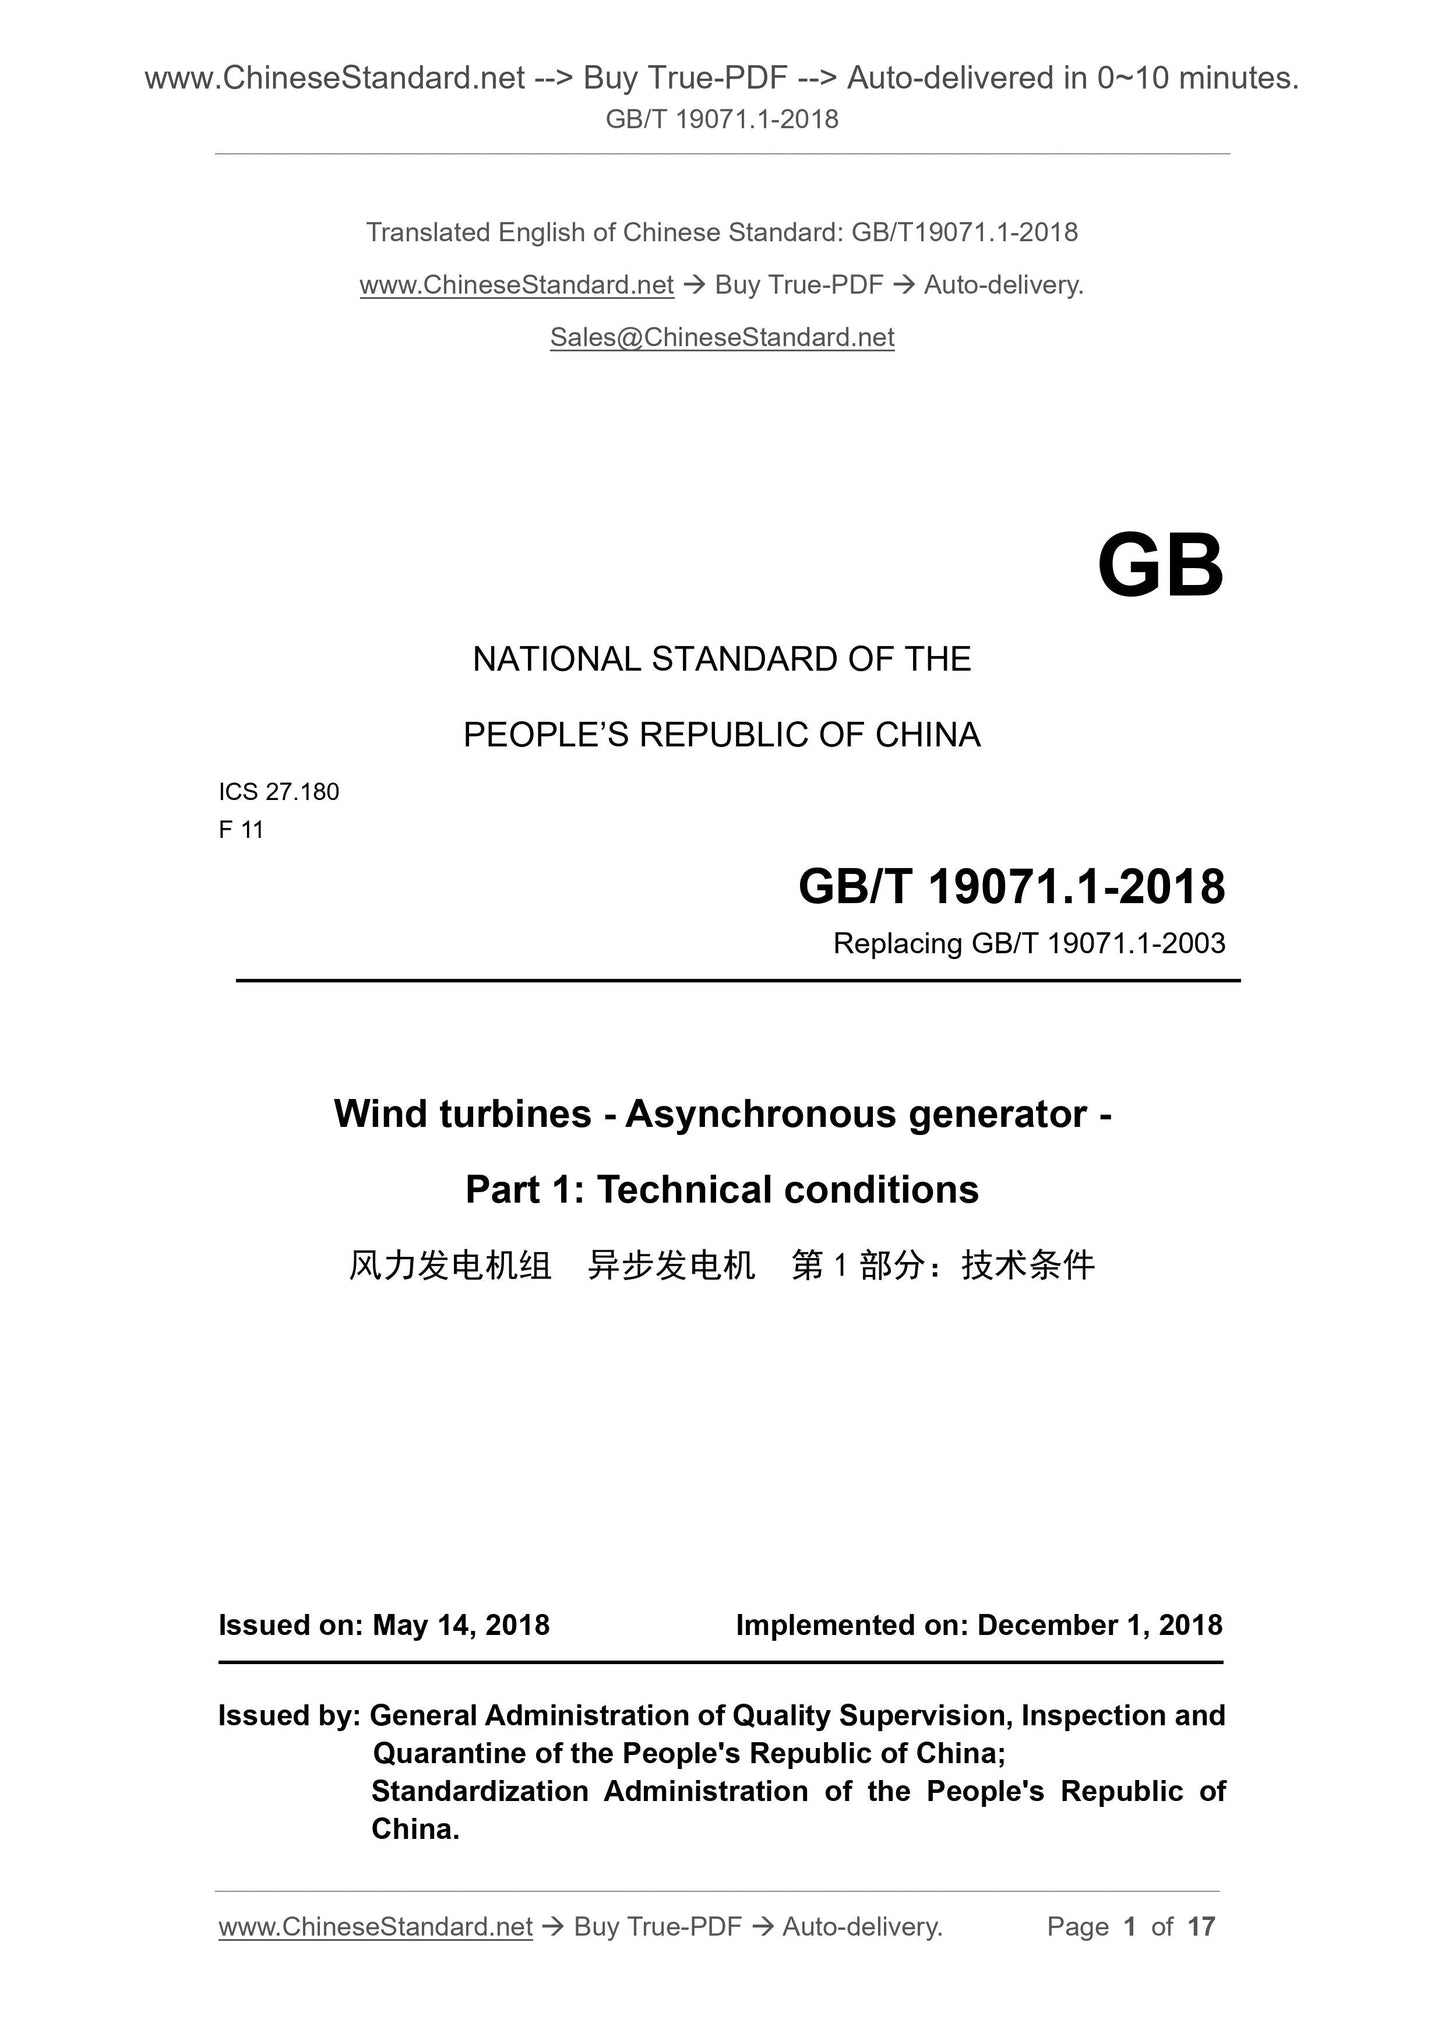 GB/T 19071.1-2018 Page 1